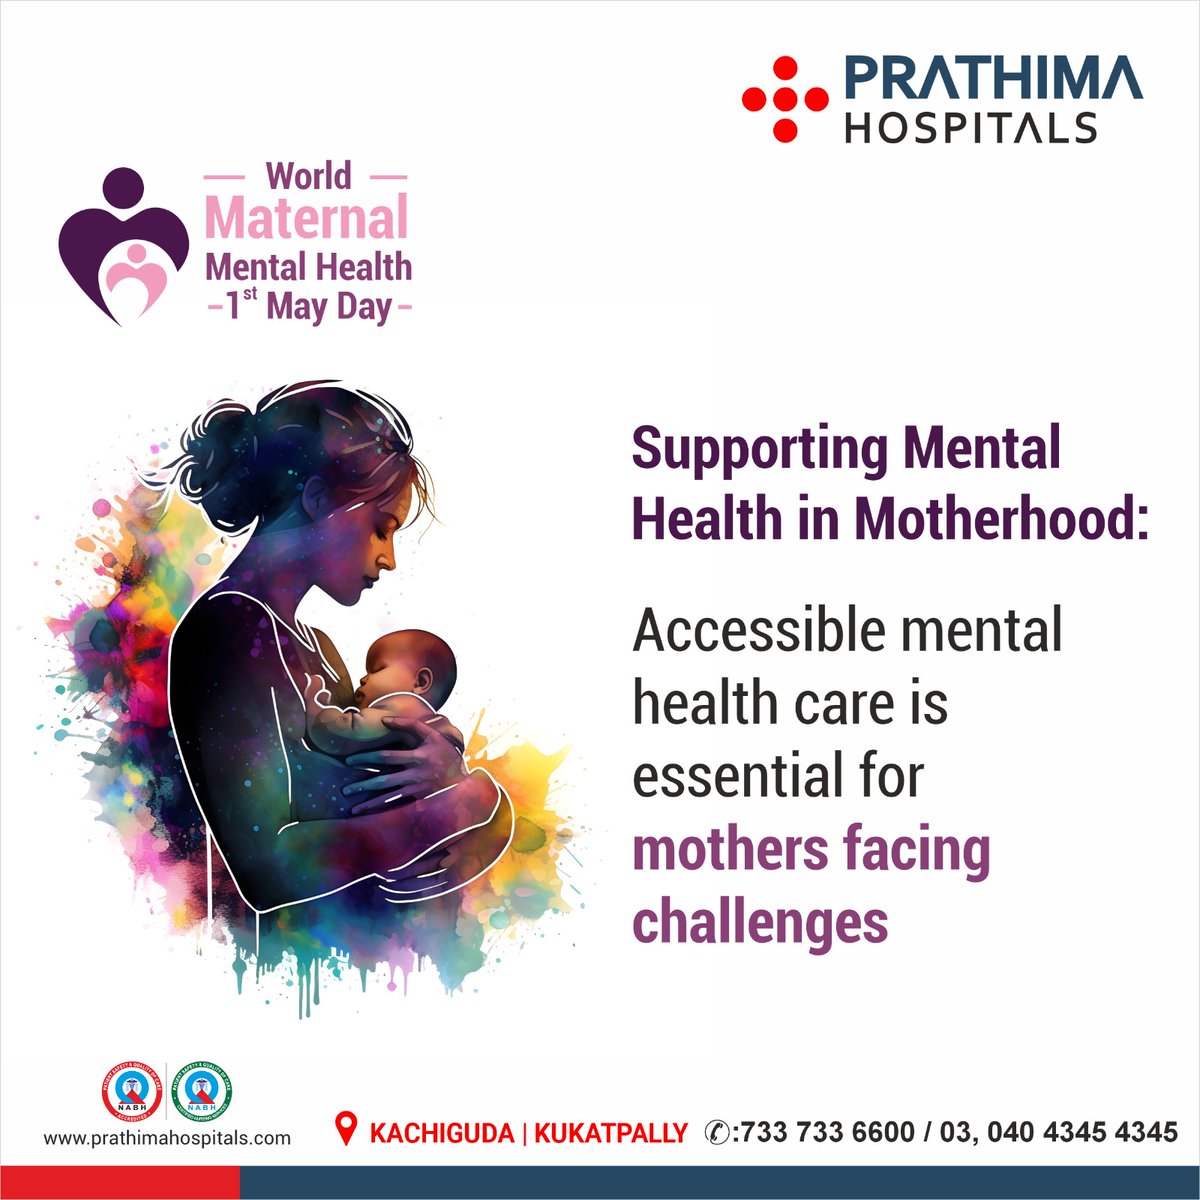 𝐖𝐨𝐫𝐥𝐝 𝐌𝐚𝐭𝐞𝐫𝐧𝐚𝐥 𝐌𝐞𝐧𝐭𝐚𝐥 𝐇𝐞𝐚𝐥𝐭𝐡 𝐃𝐚𝐲!

Supporting Mental Health in Motherhood:
Accessible mental health care is essential for mothers facing challenges

#MaternalMentalHealth #WorldMaternalMentalHealth #PerinatalMentalHealth  #prathimahospitals  #PH